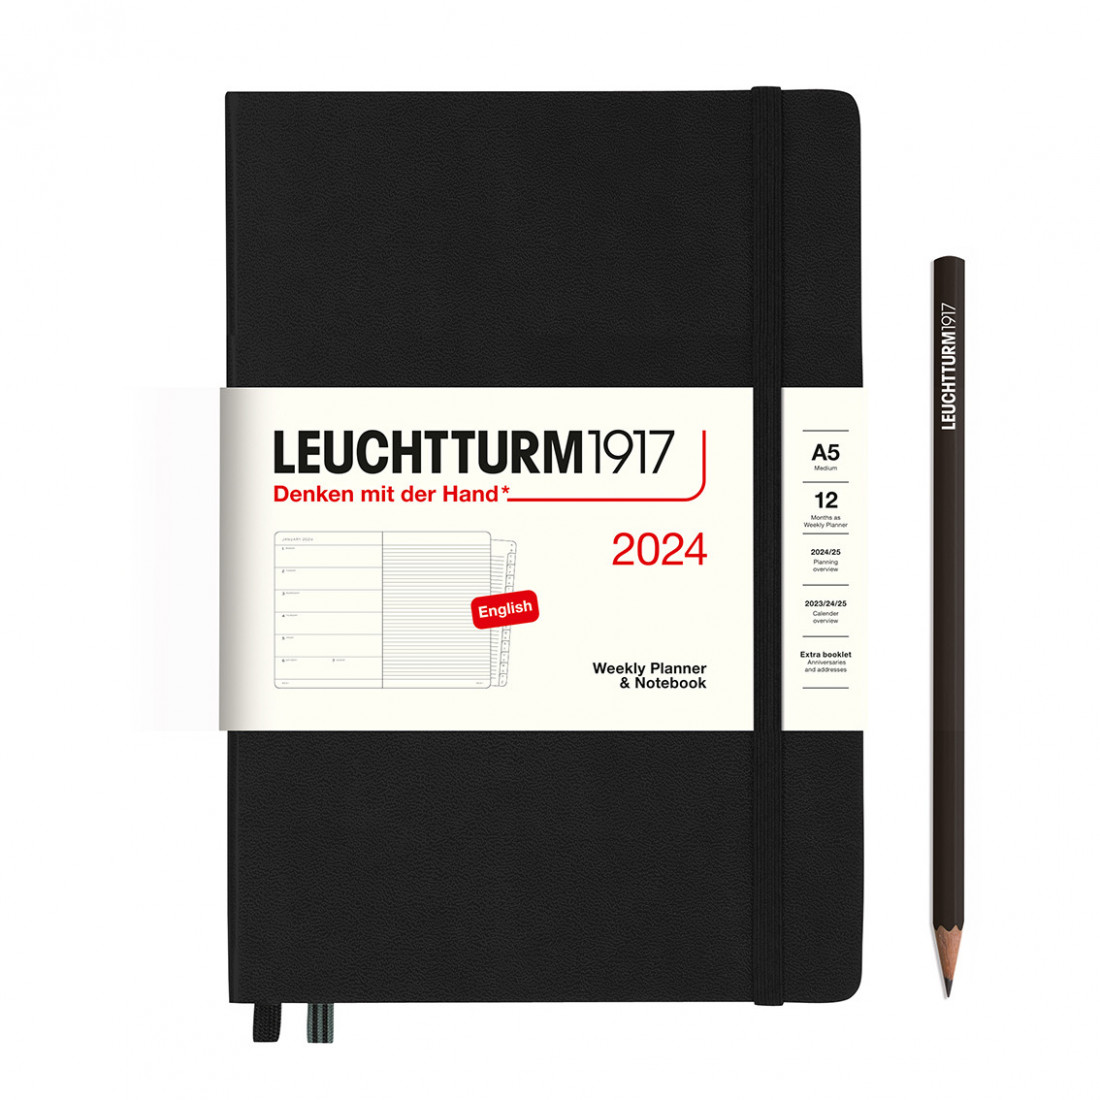 Leuchtturm 1917 Weekly Planner and Notebook 2024 Forest Green Pocket A6